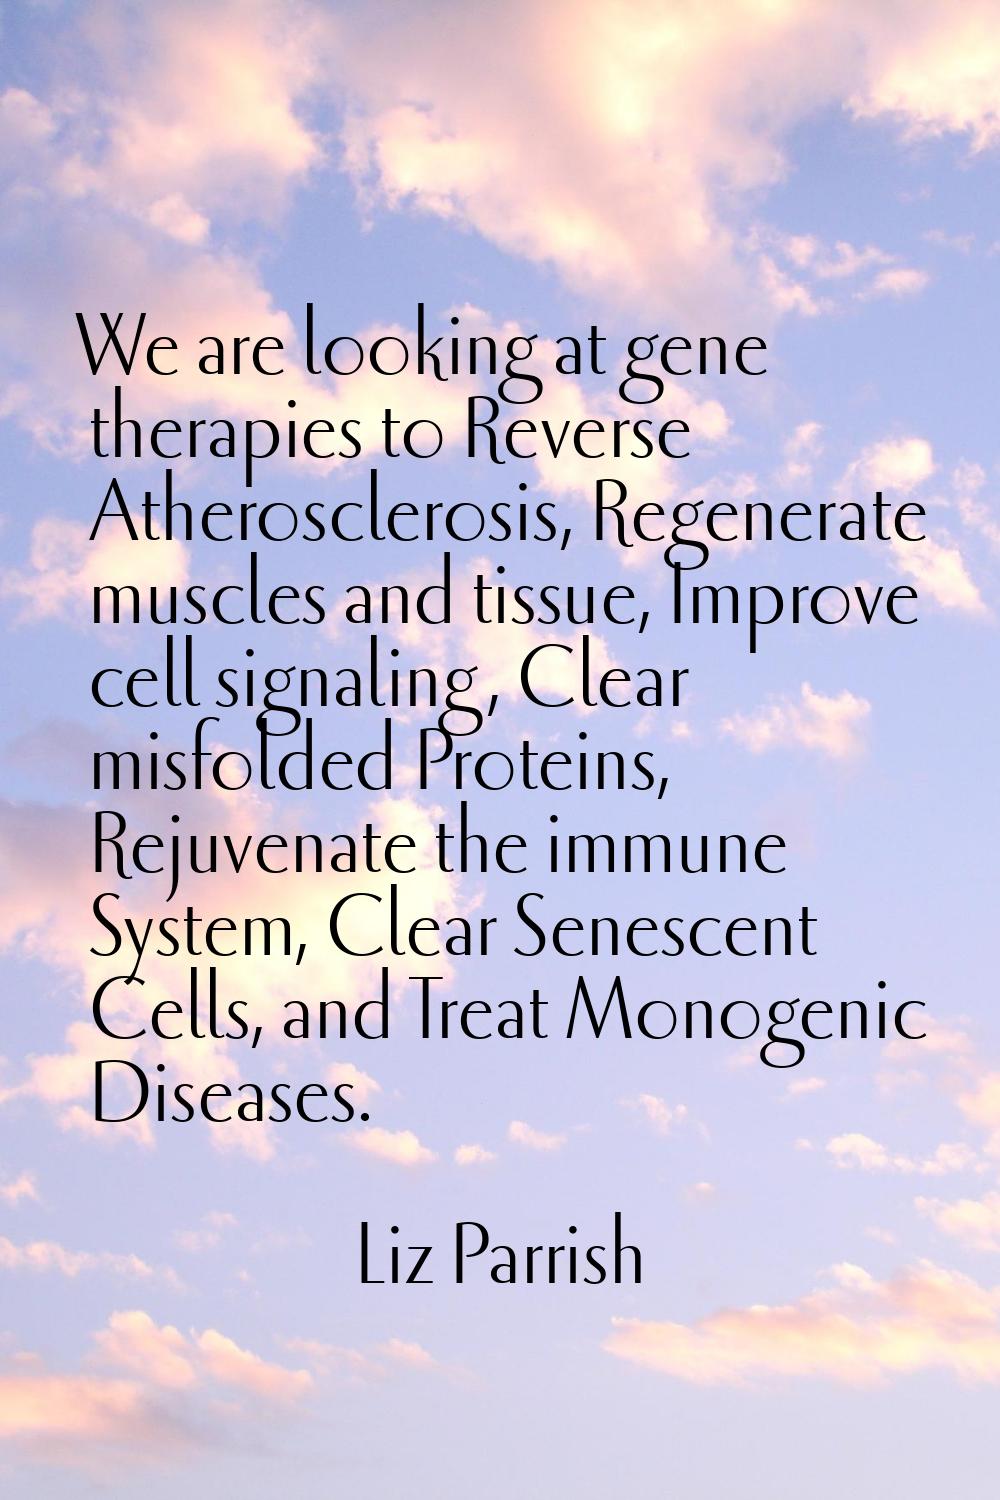 We are looking at gene therapies to Reverse Atherosclerosis, Regenerate muscles and tissue, Improve